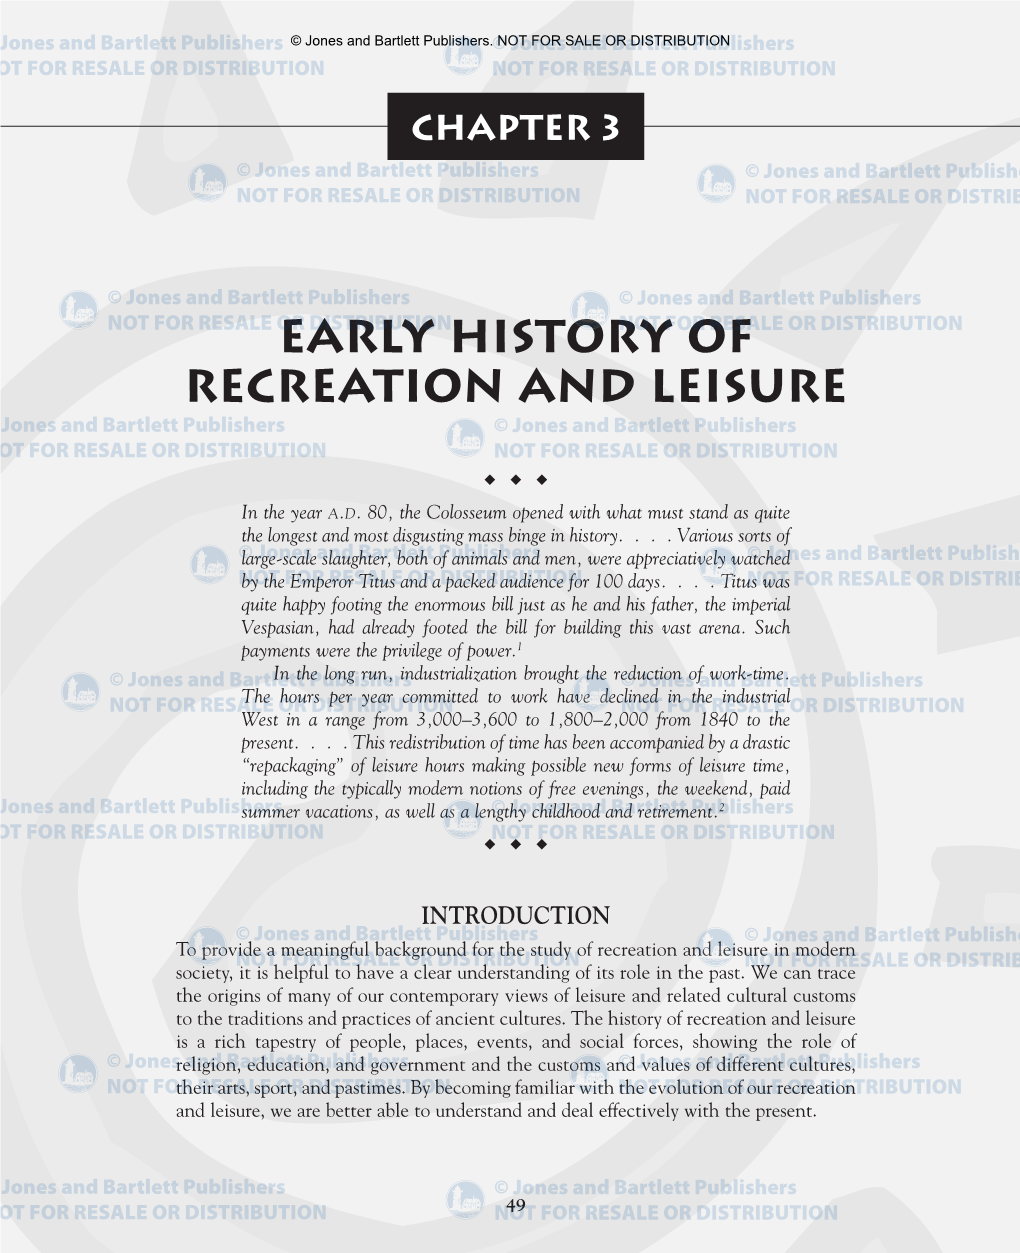 Early History of Recreation and Leisure